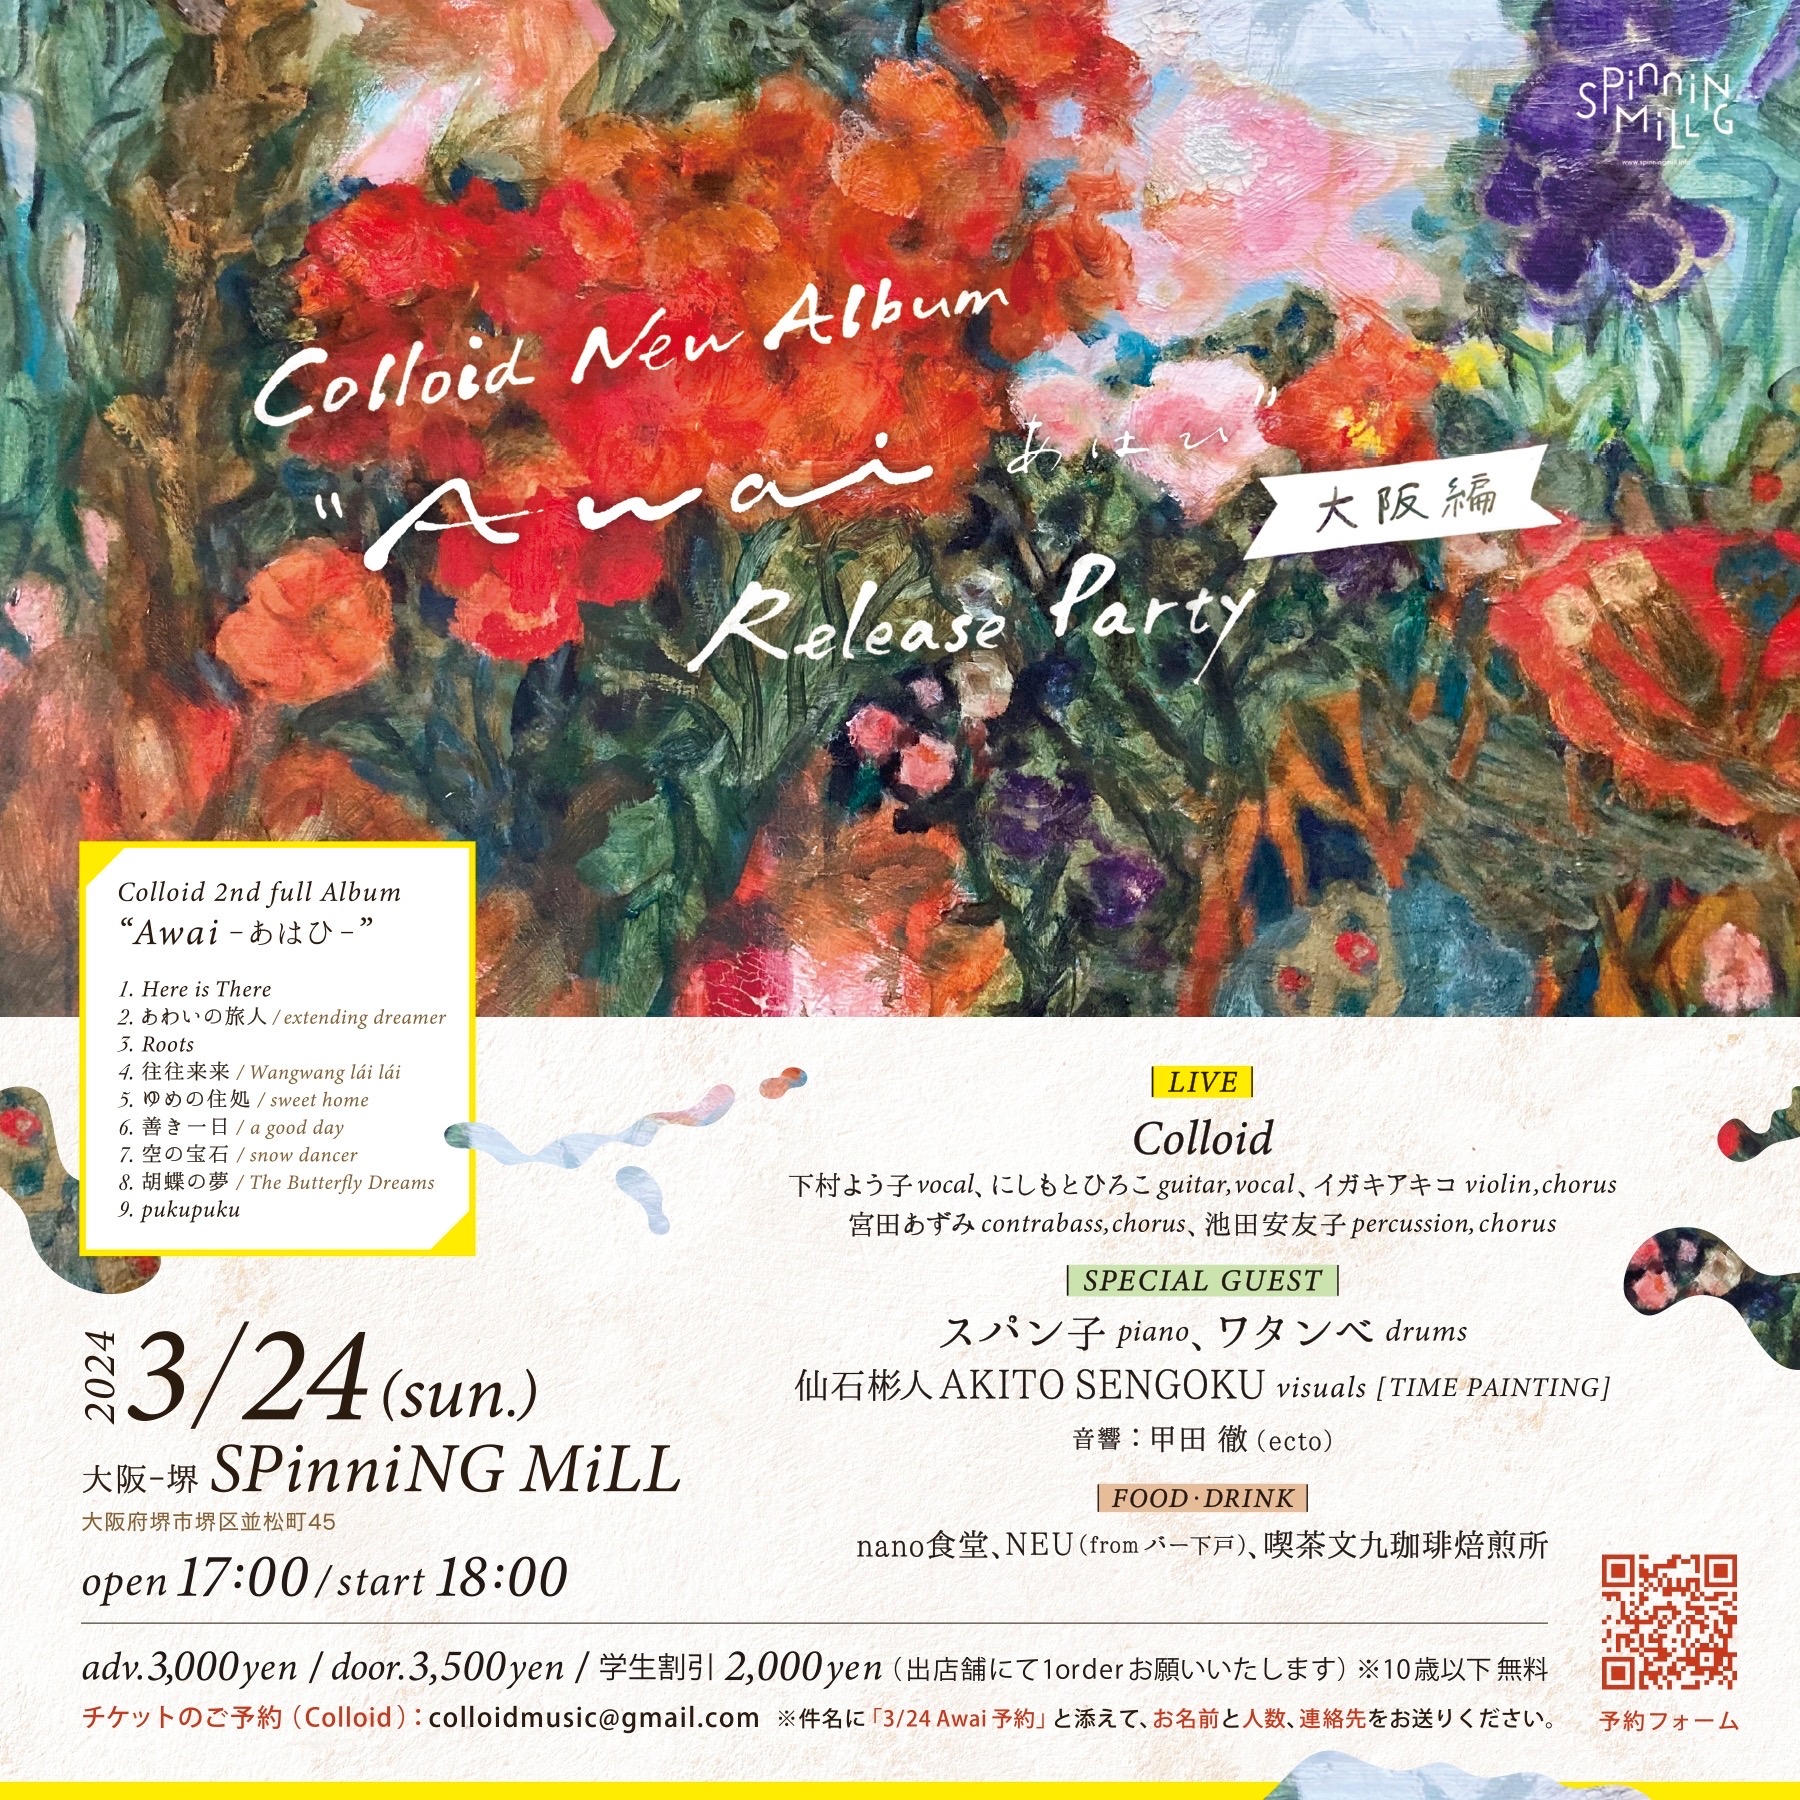 Colloid New Album “Awai - あはひ -” Release Party